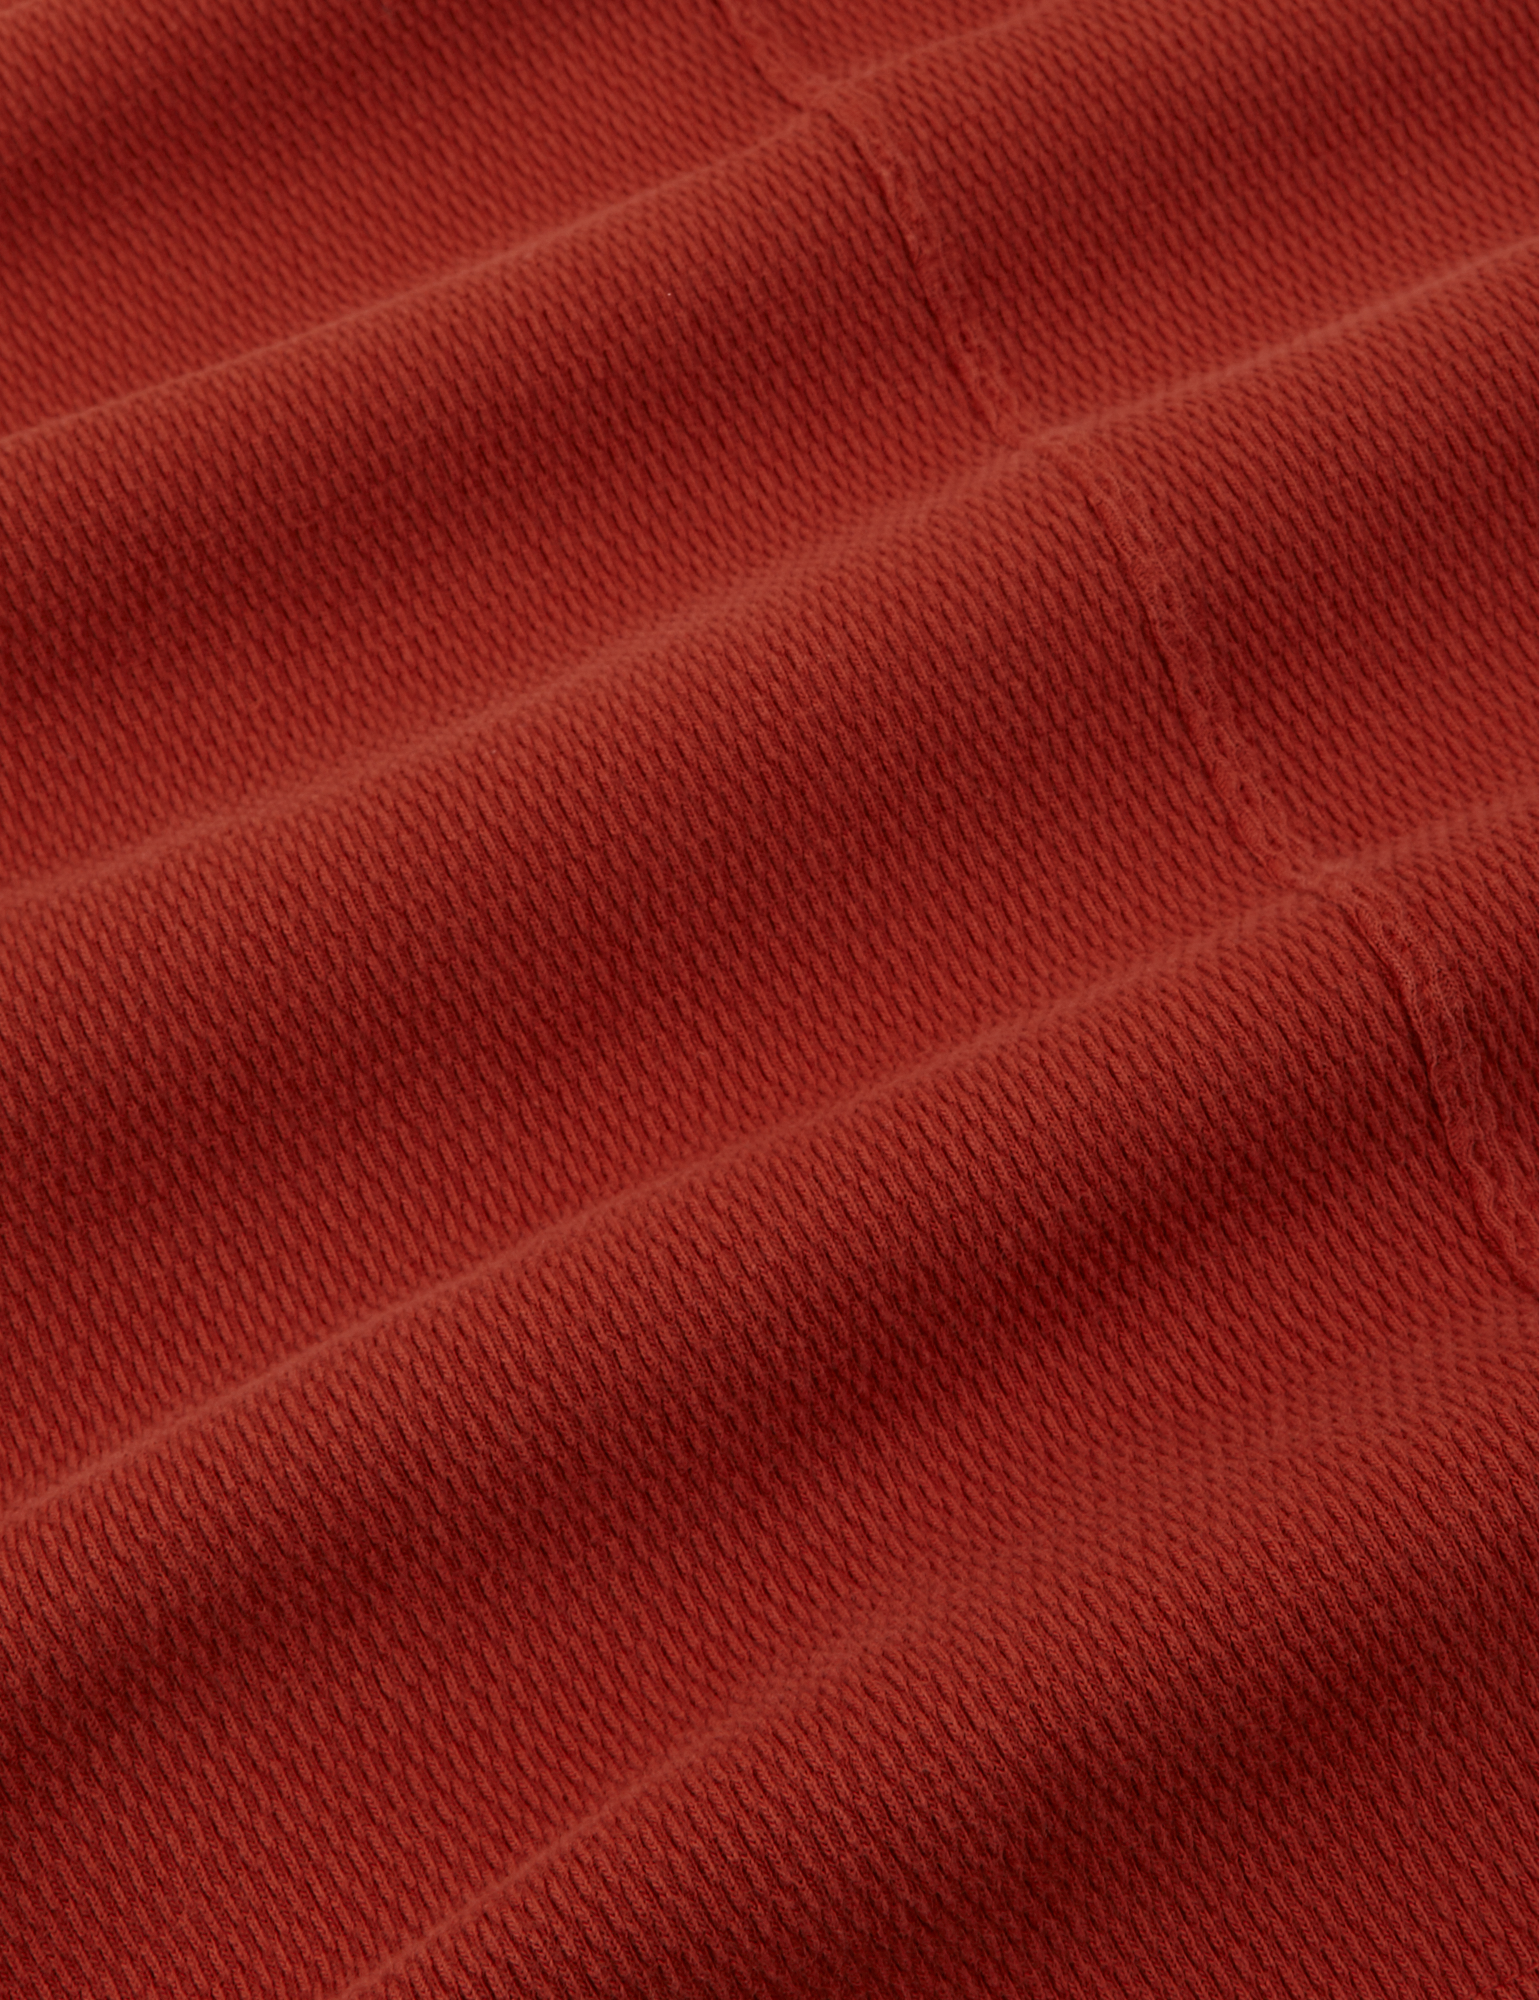 Long Sleeve Fisherman Polo in Paprika fabric detail